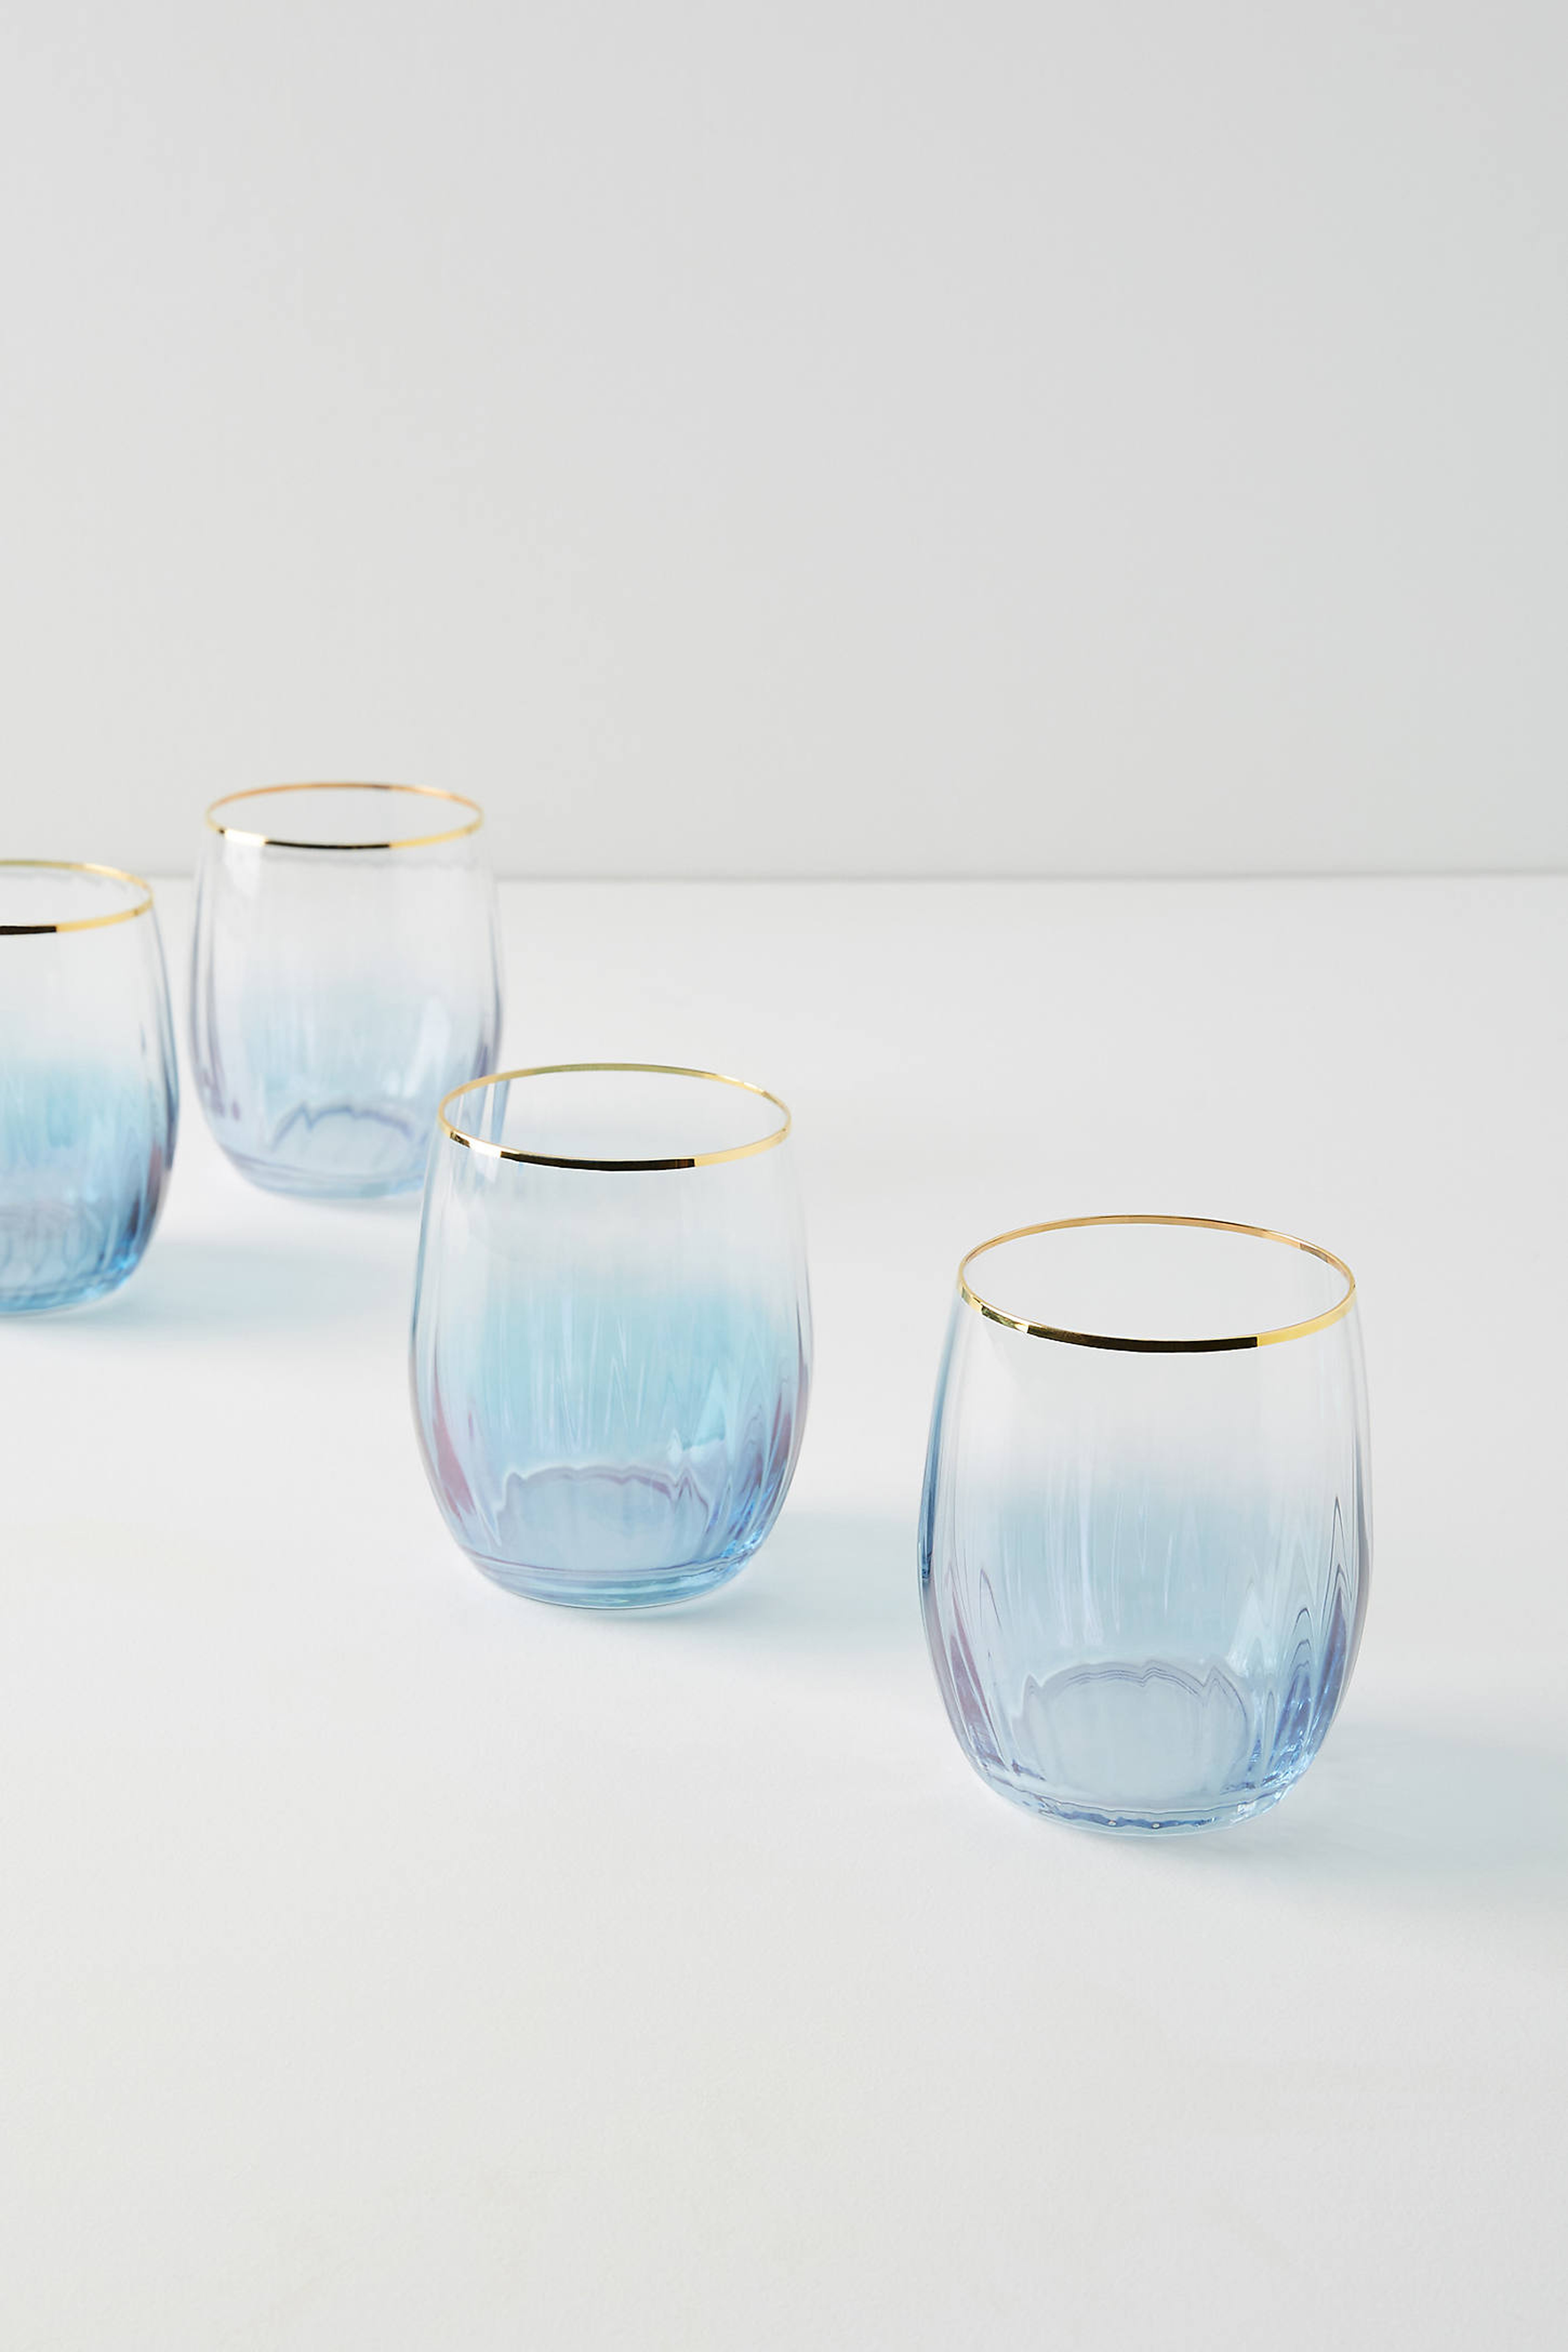 Waterfall Stemless Wine Glasses, Set of 4 - Anthropologie